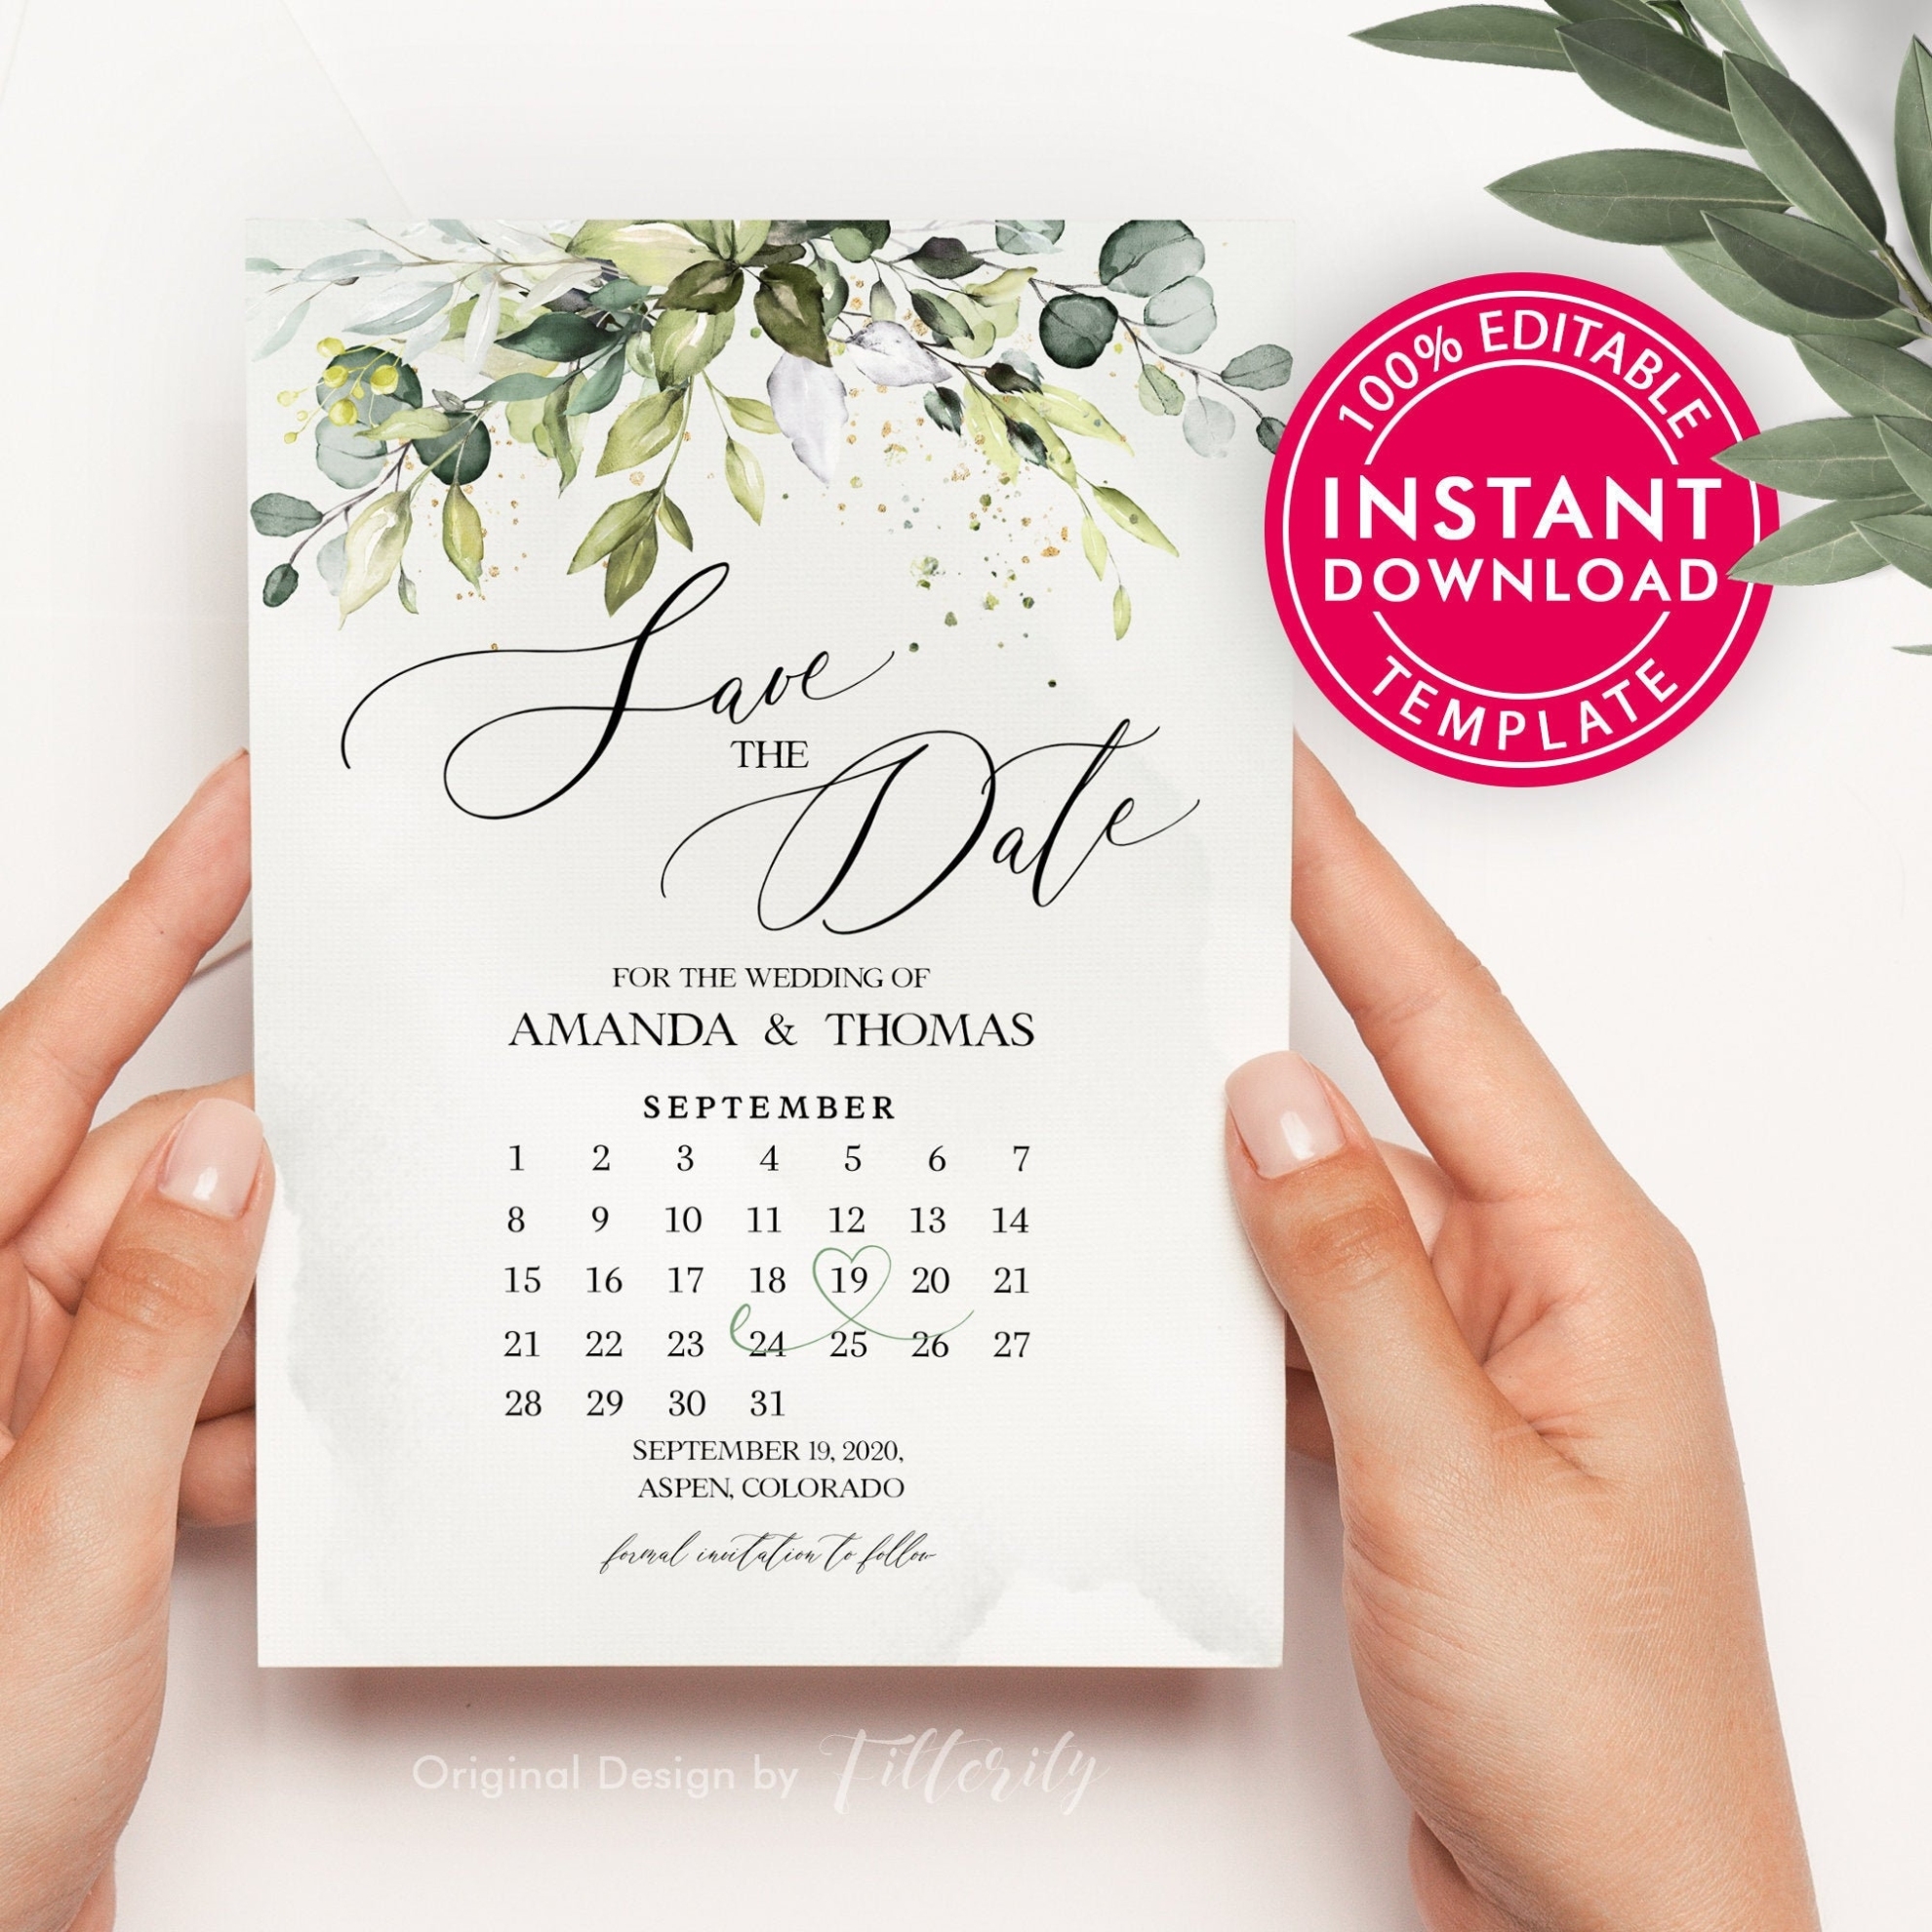 Save The Date Calendar Save The Date Template With Photo | Etsy With Save The Date Cards Templates